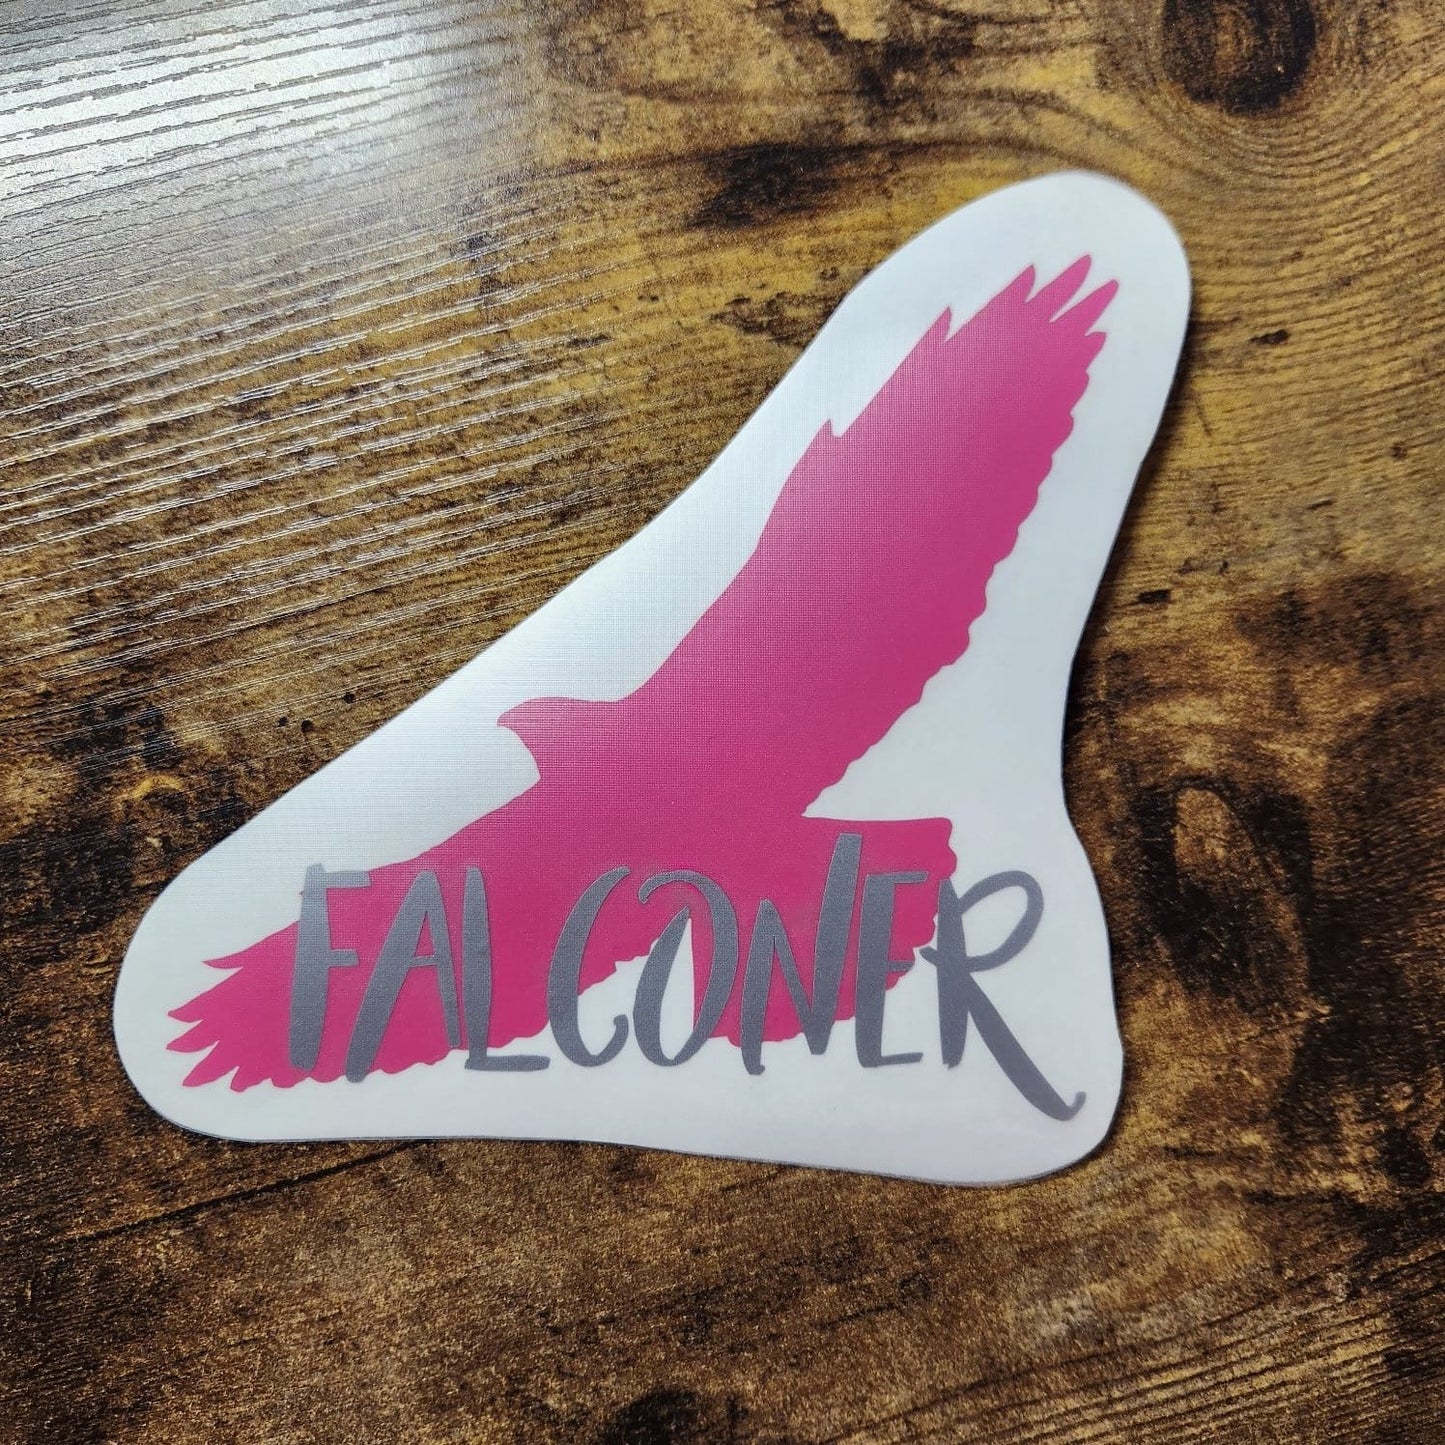 Falconer - Vinyl Decal (Made to Order)